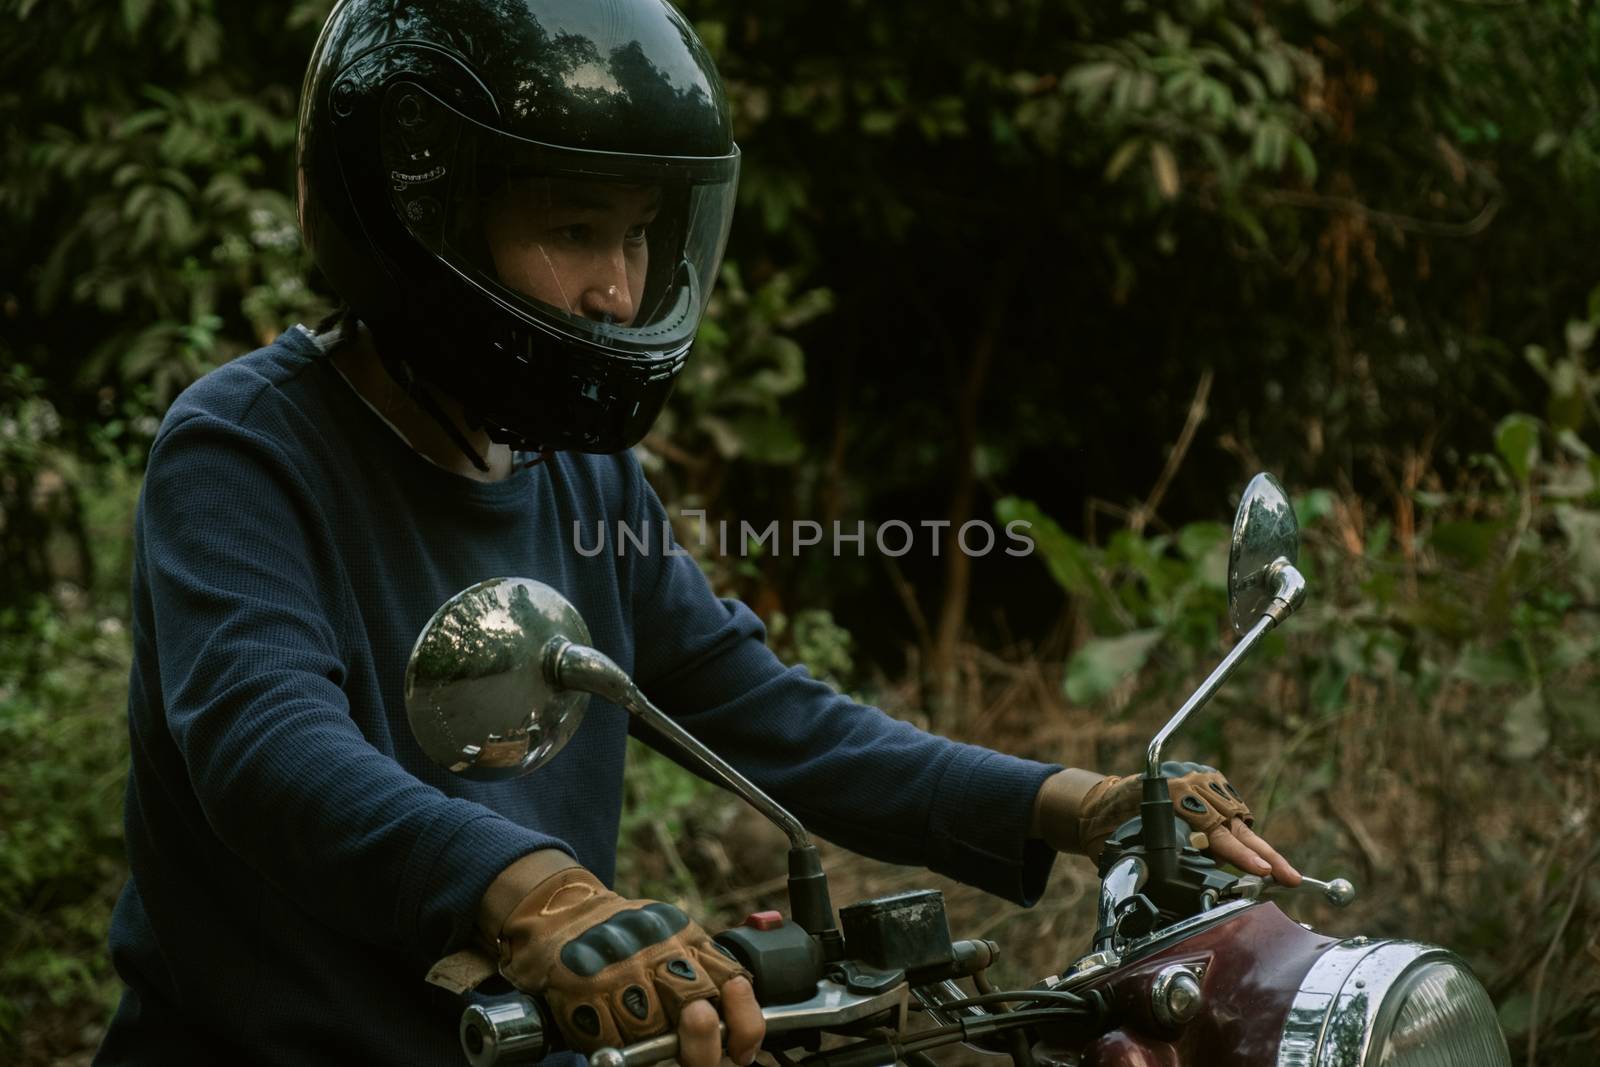 A man on motorcycle by snep_photo